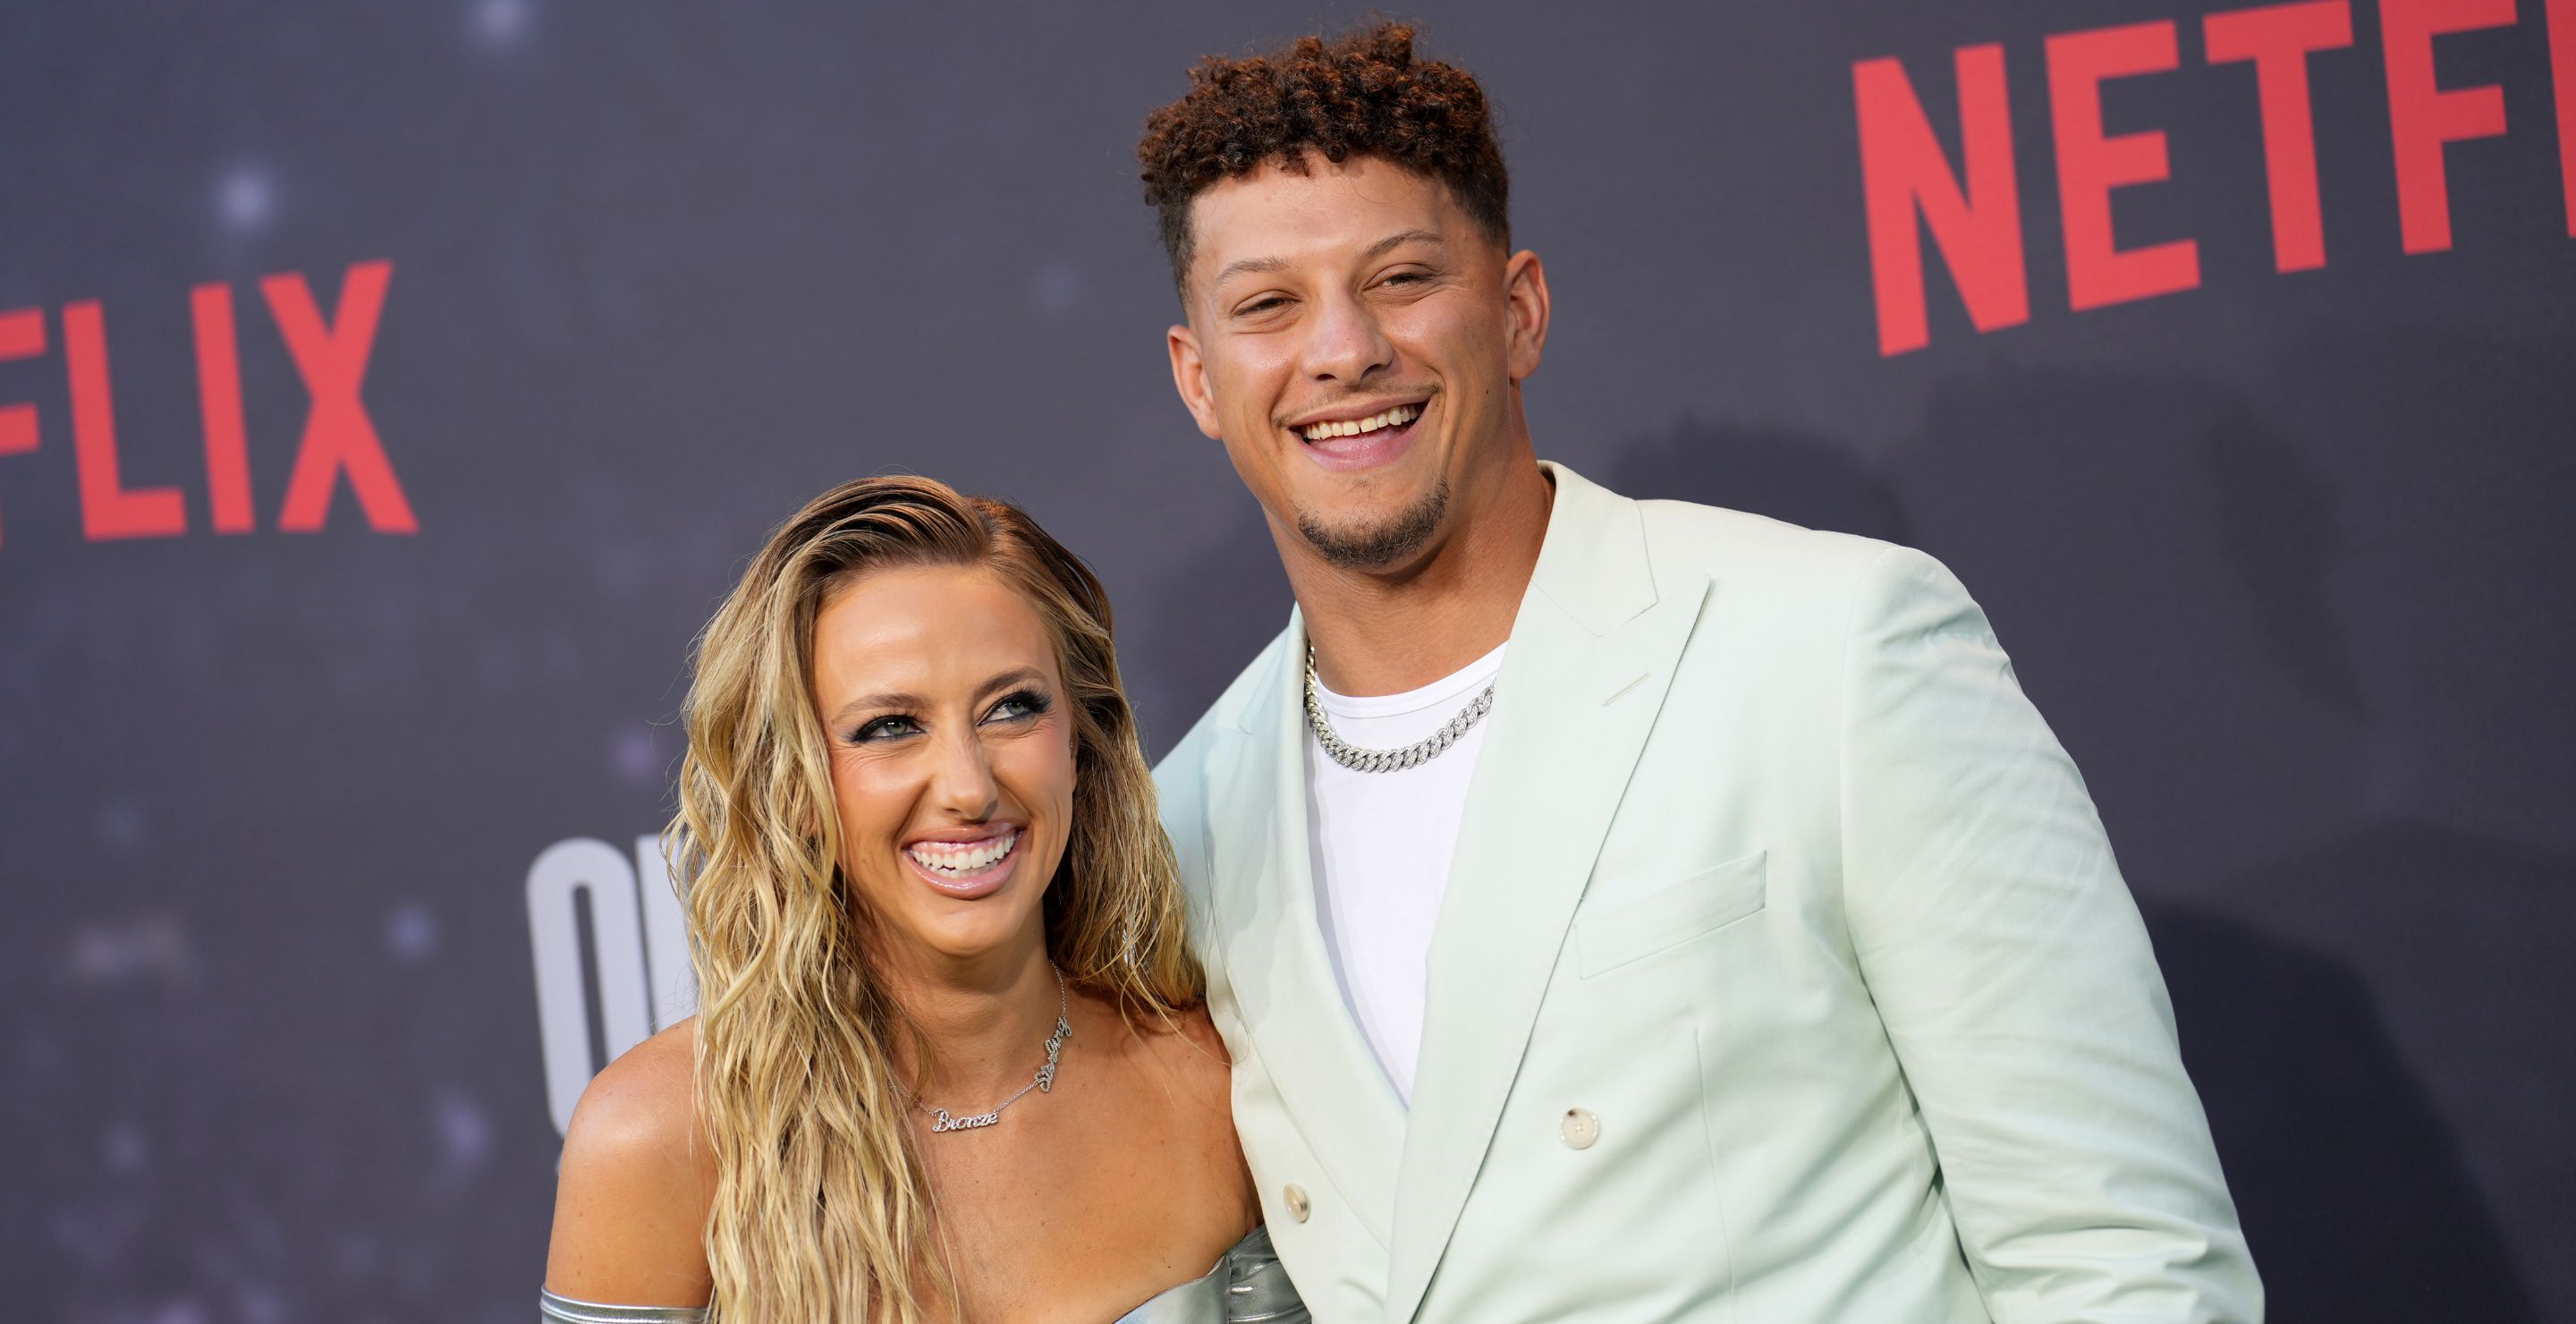 Kansas City Chiefs' Patrick Mahomes and wife Brittany: everything